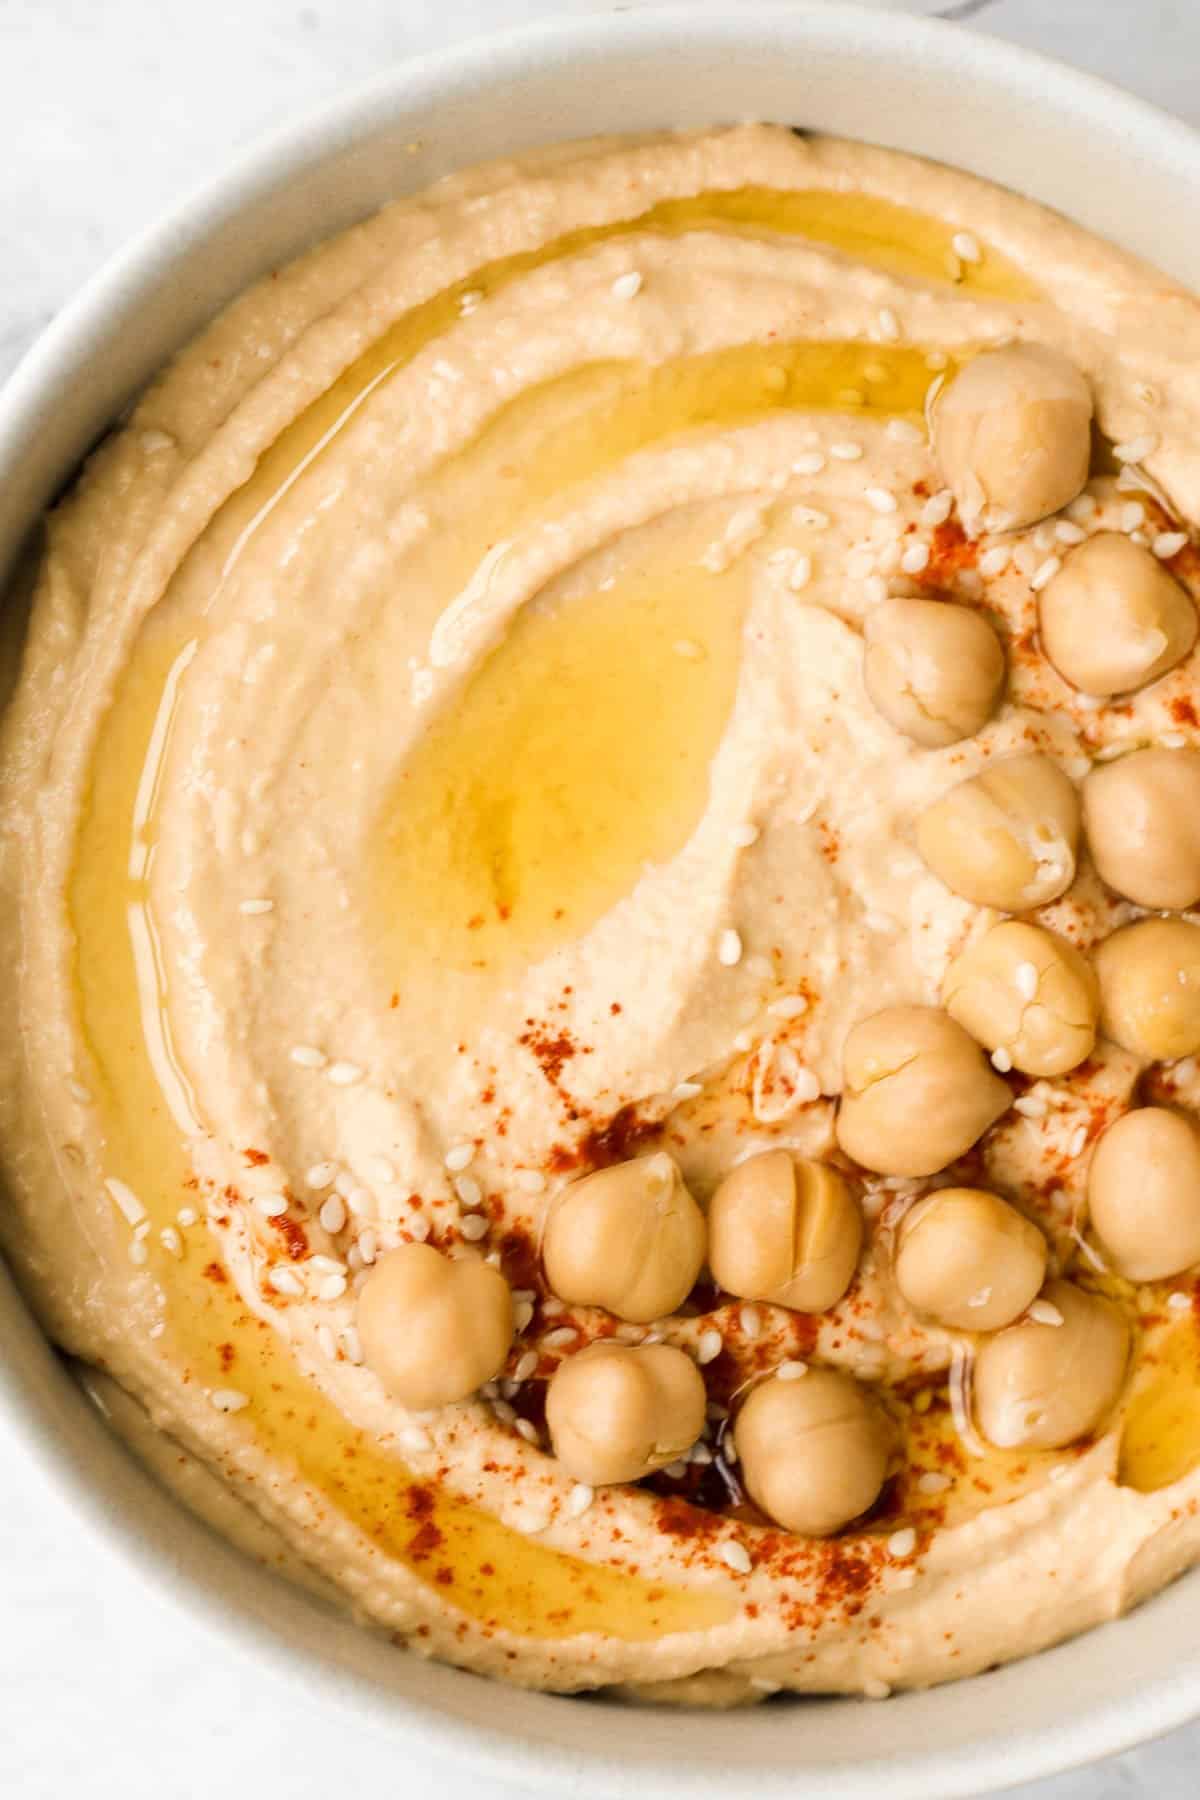 Whip up smooth and creamy classic hummus dip at home in just 5 minutes, by combining chickpeas, tahini, olive oil, lemon juice and garlic in the blender. | aheadofthyme.com